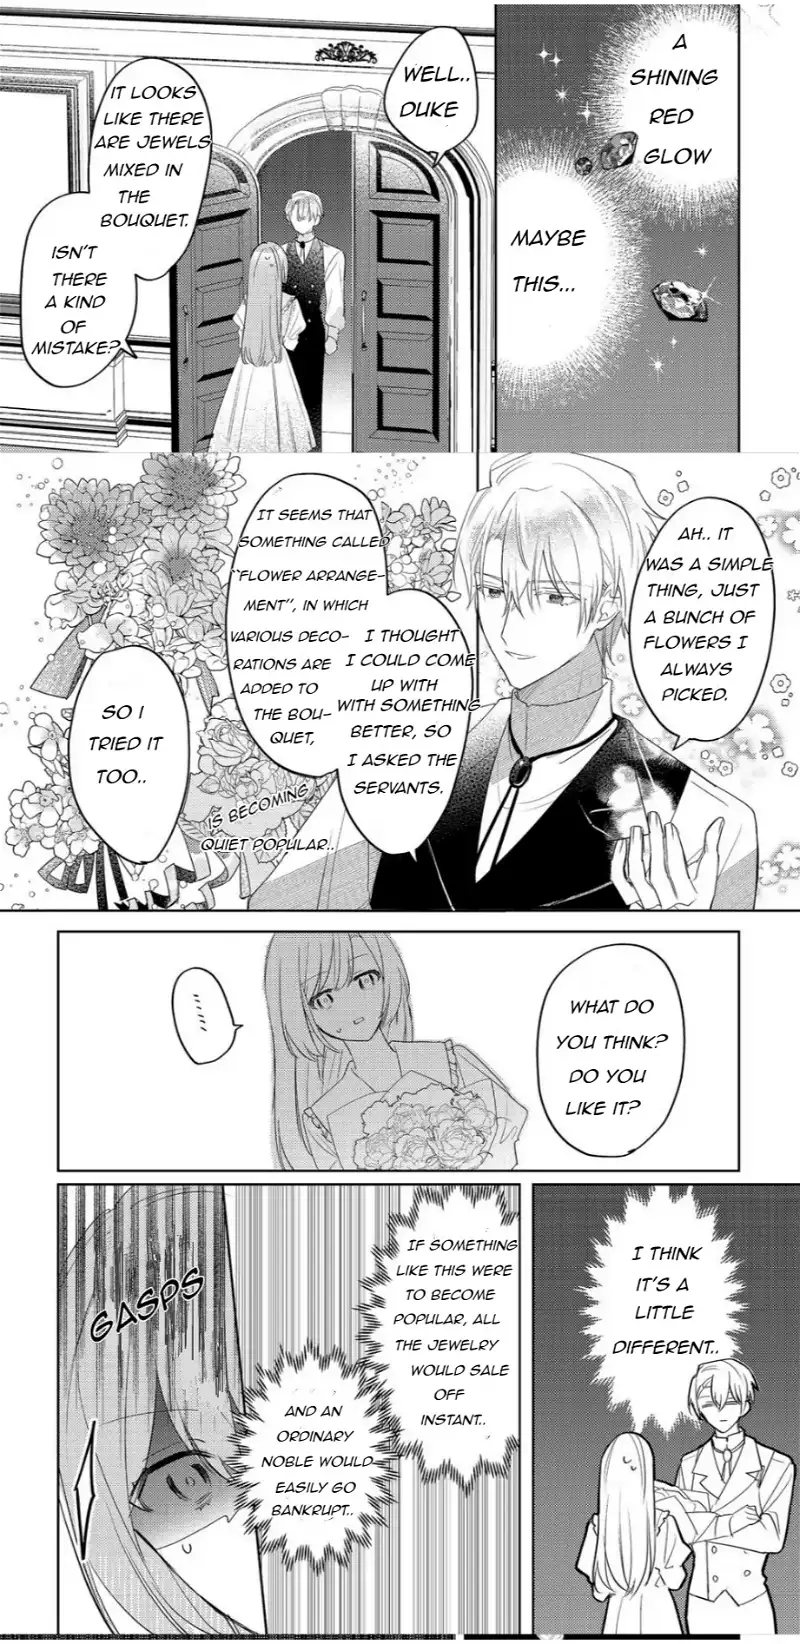 The Duke Who, Until Yesterday, Had Never Even Called My Name is Suddenly Doting on Me? Chapter 2 - page 3